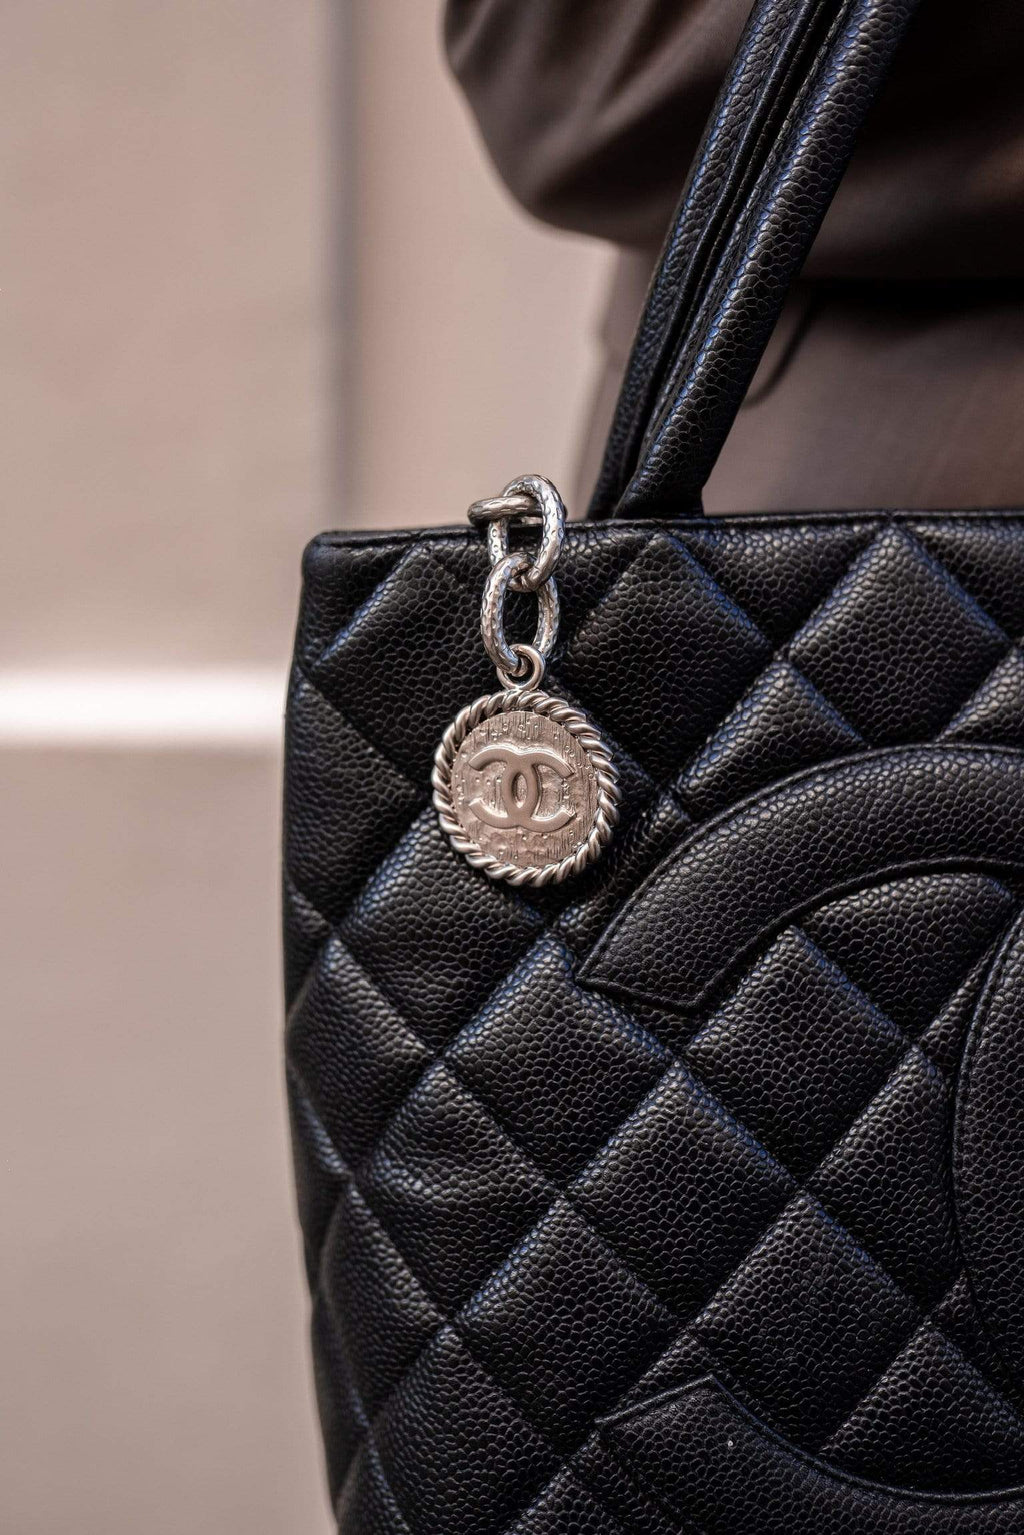 Authentic CHANEL CC Logo CAVIAR Quilted Leather Medallion Tote Bag Purse  C301